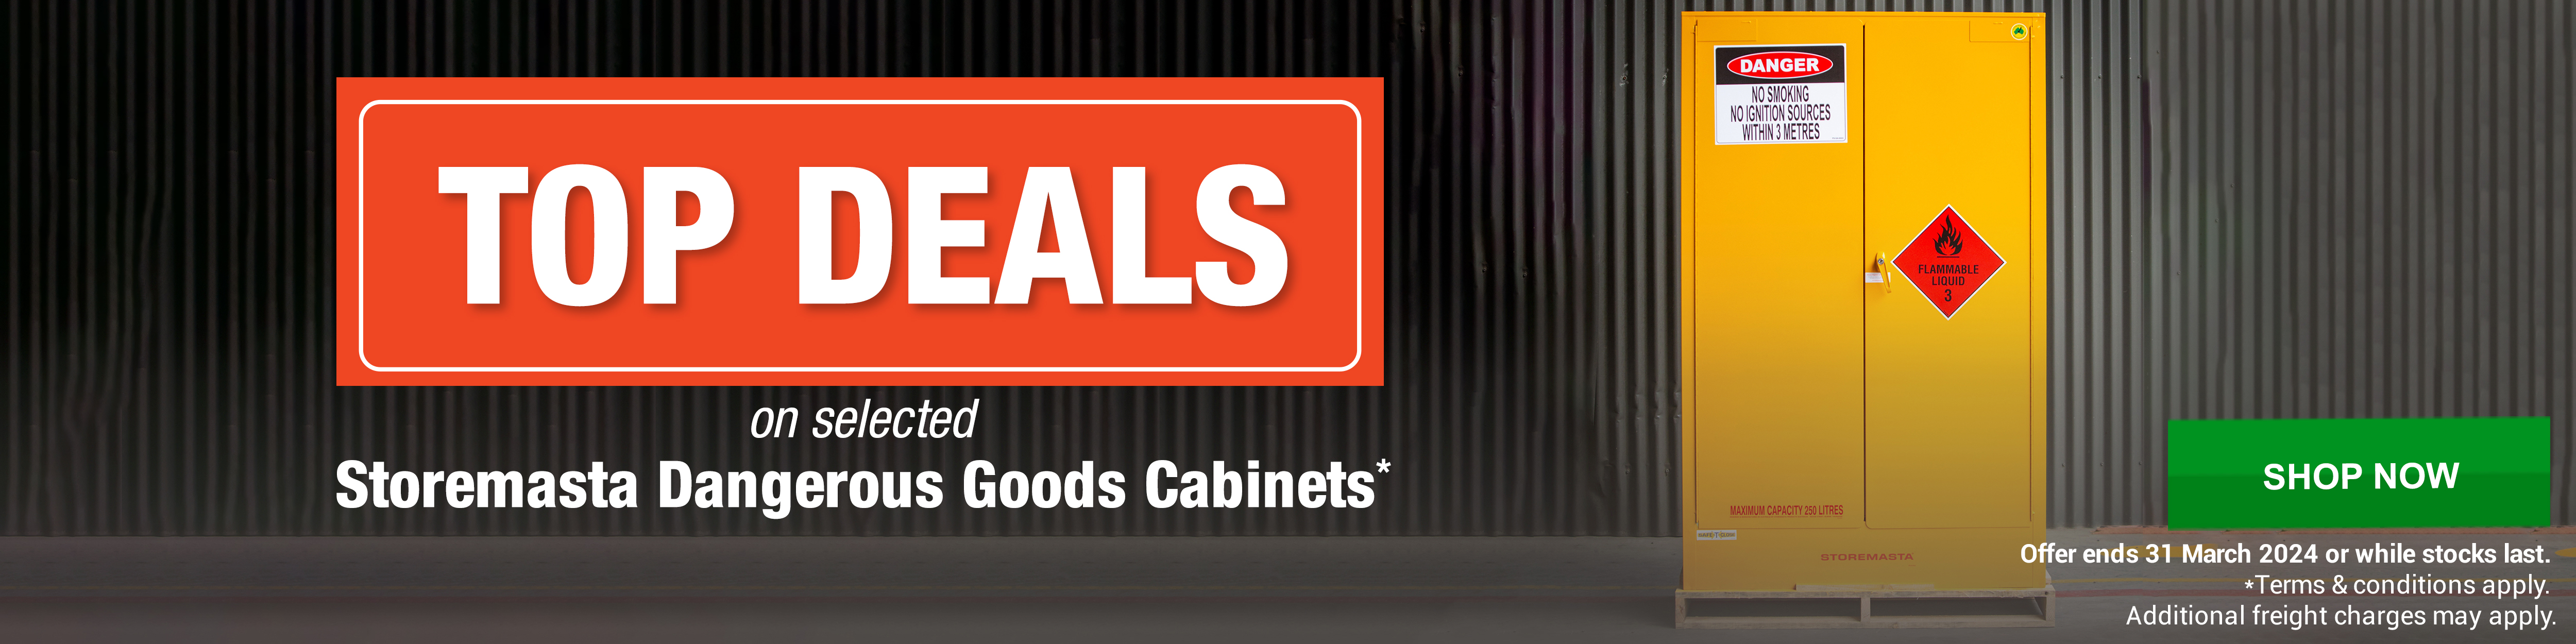 Top Deals on selected Storemasta Dangerous Goods Cabinets* Offer ends 31 March 2024 or while stocks last. Terms, conditions and exclusions apply.